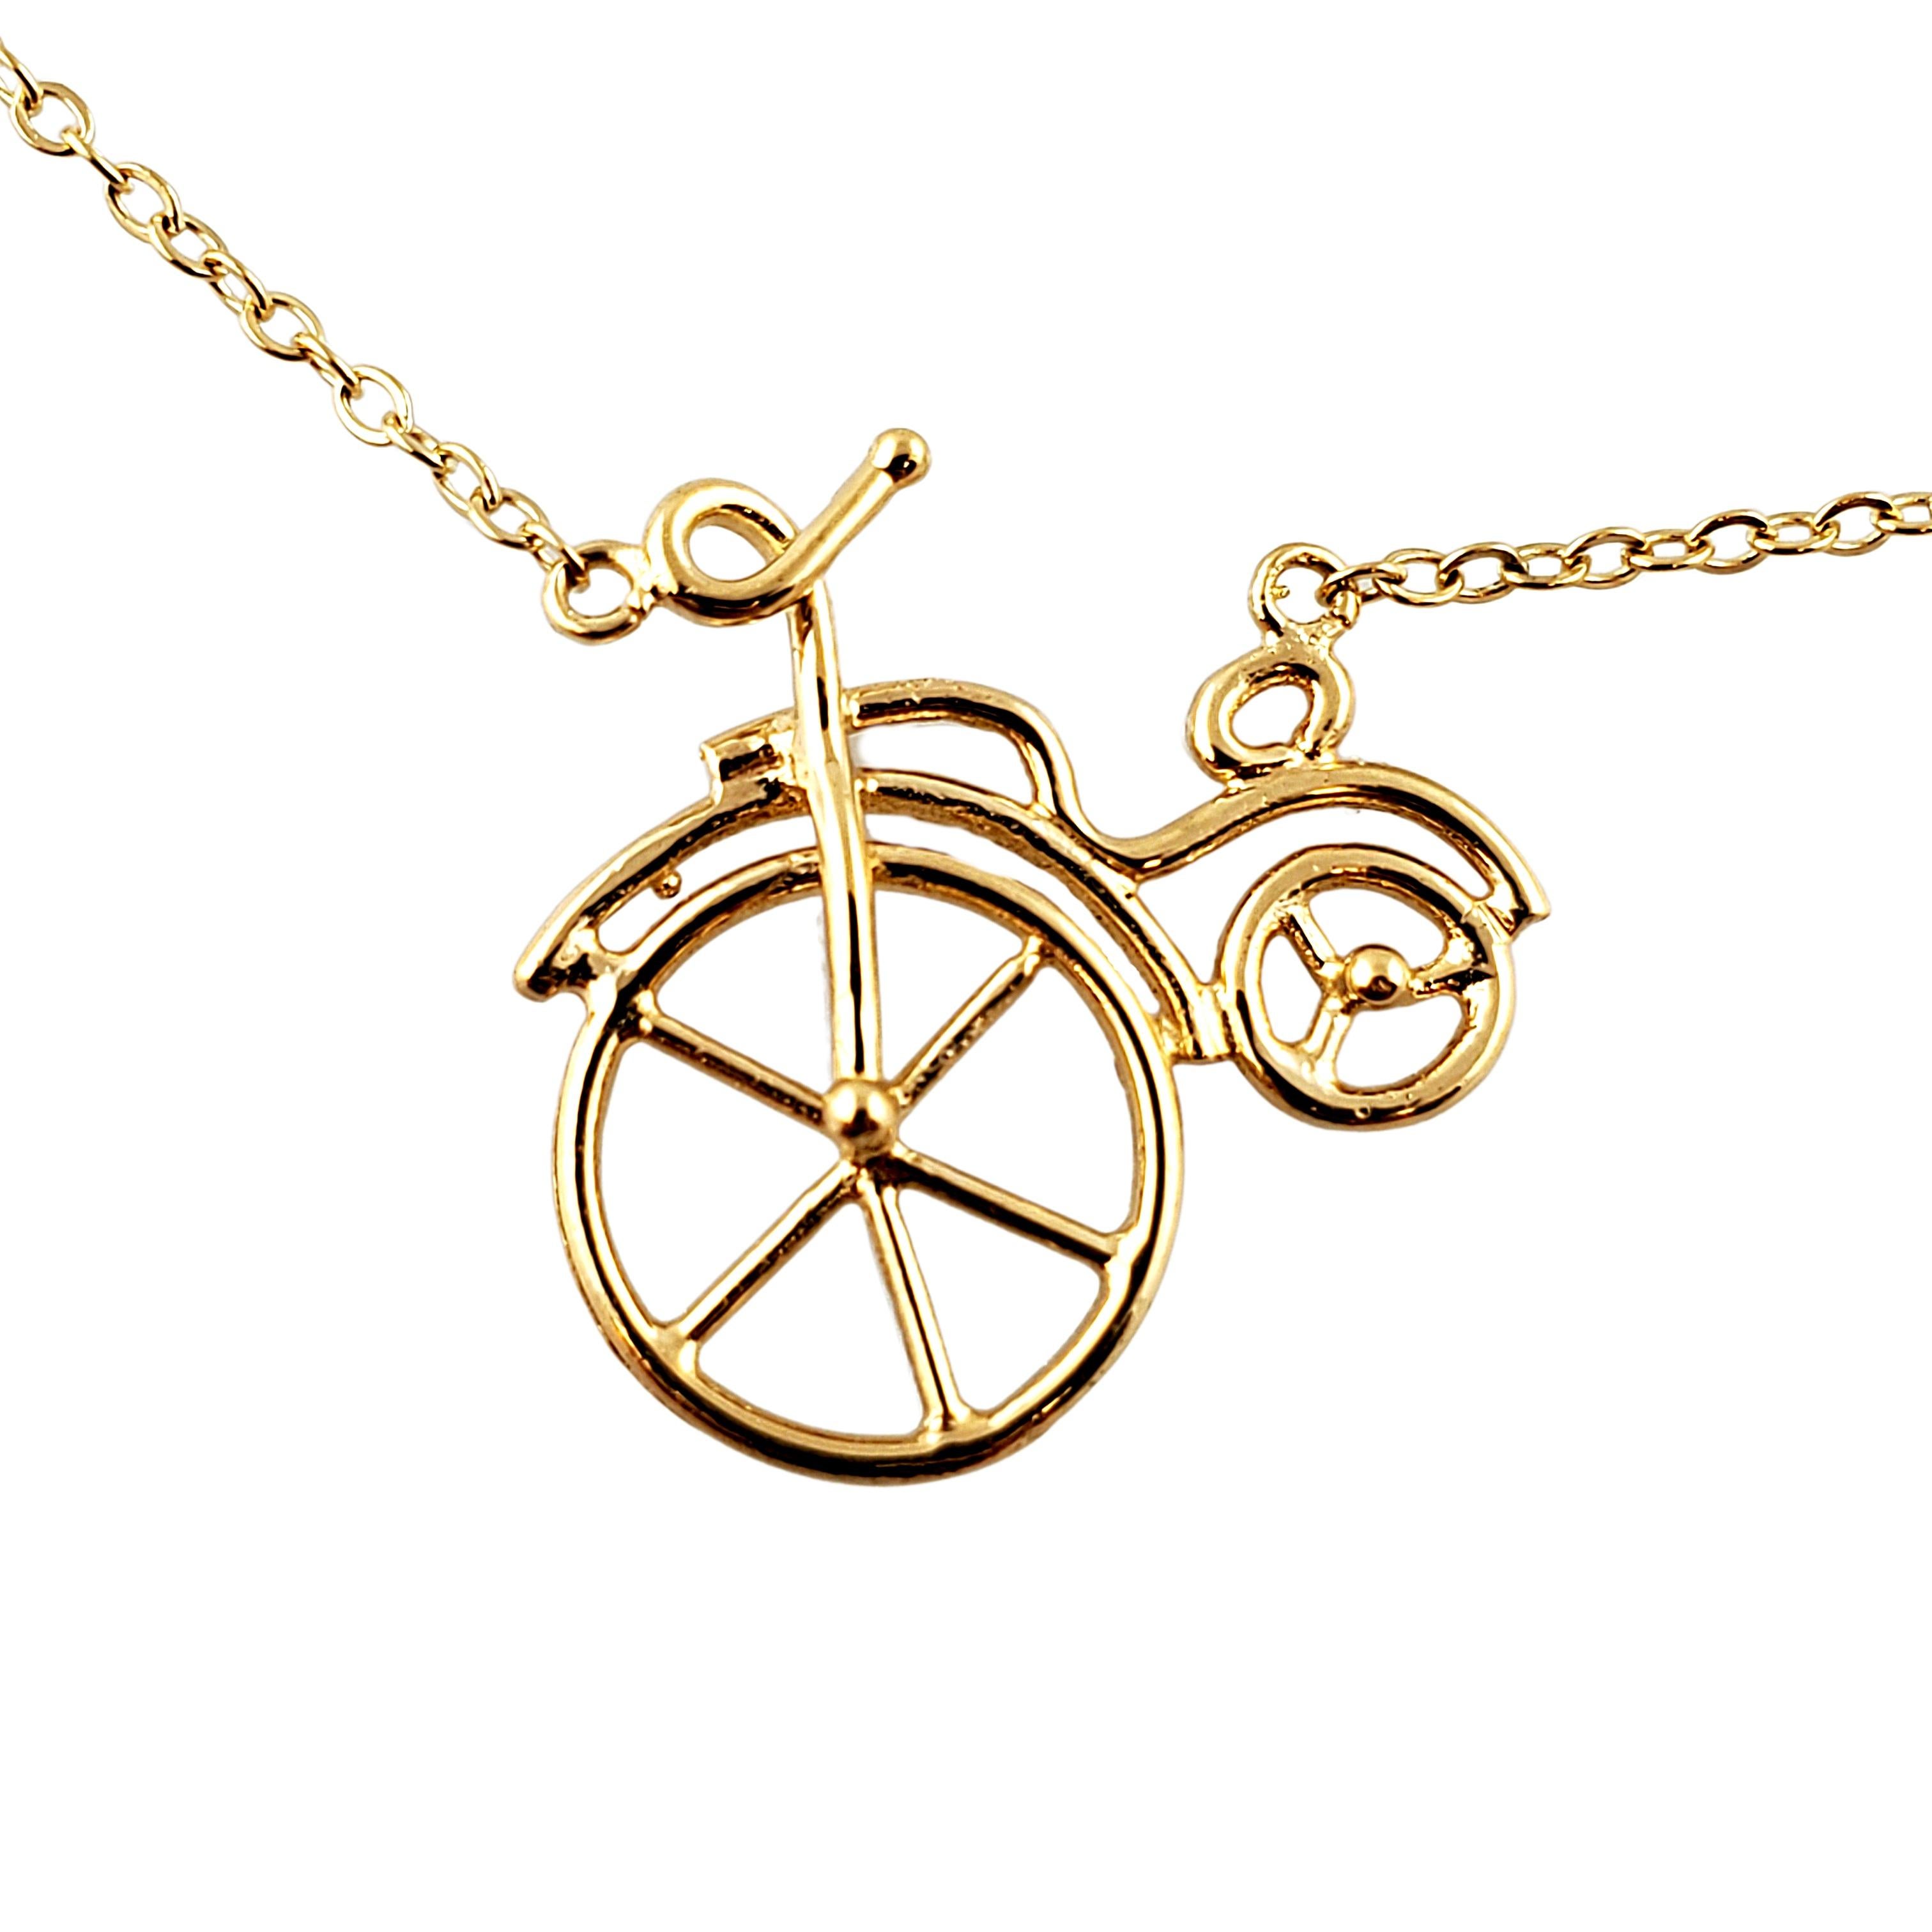 14K Yellow Gold Wire Bike Necklace

Beautiful 14K yellow gold Wire Bike Necklace features a bike called the Penny-Farthing which was very popular in the 1870s-1880s. It was the first machine called a bicycle and the large front wheel was designed